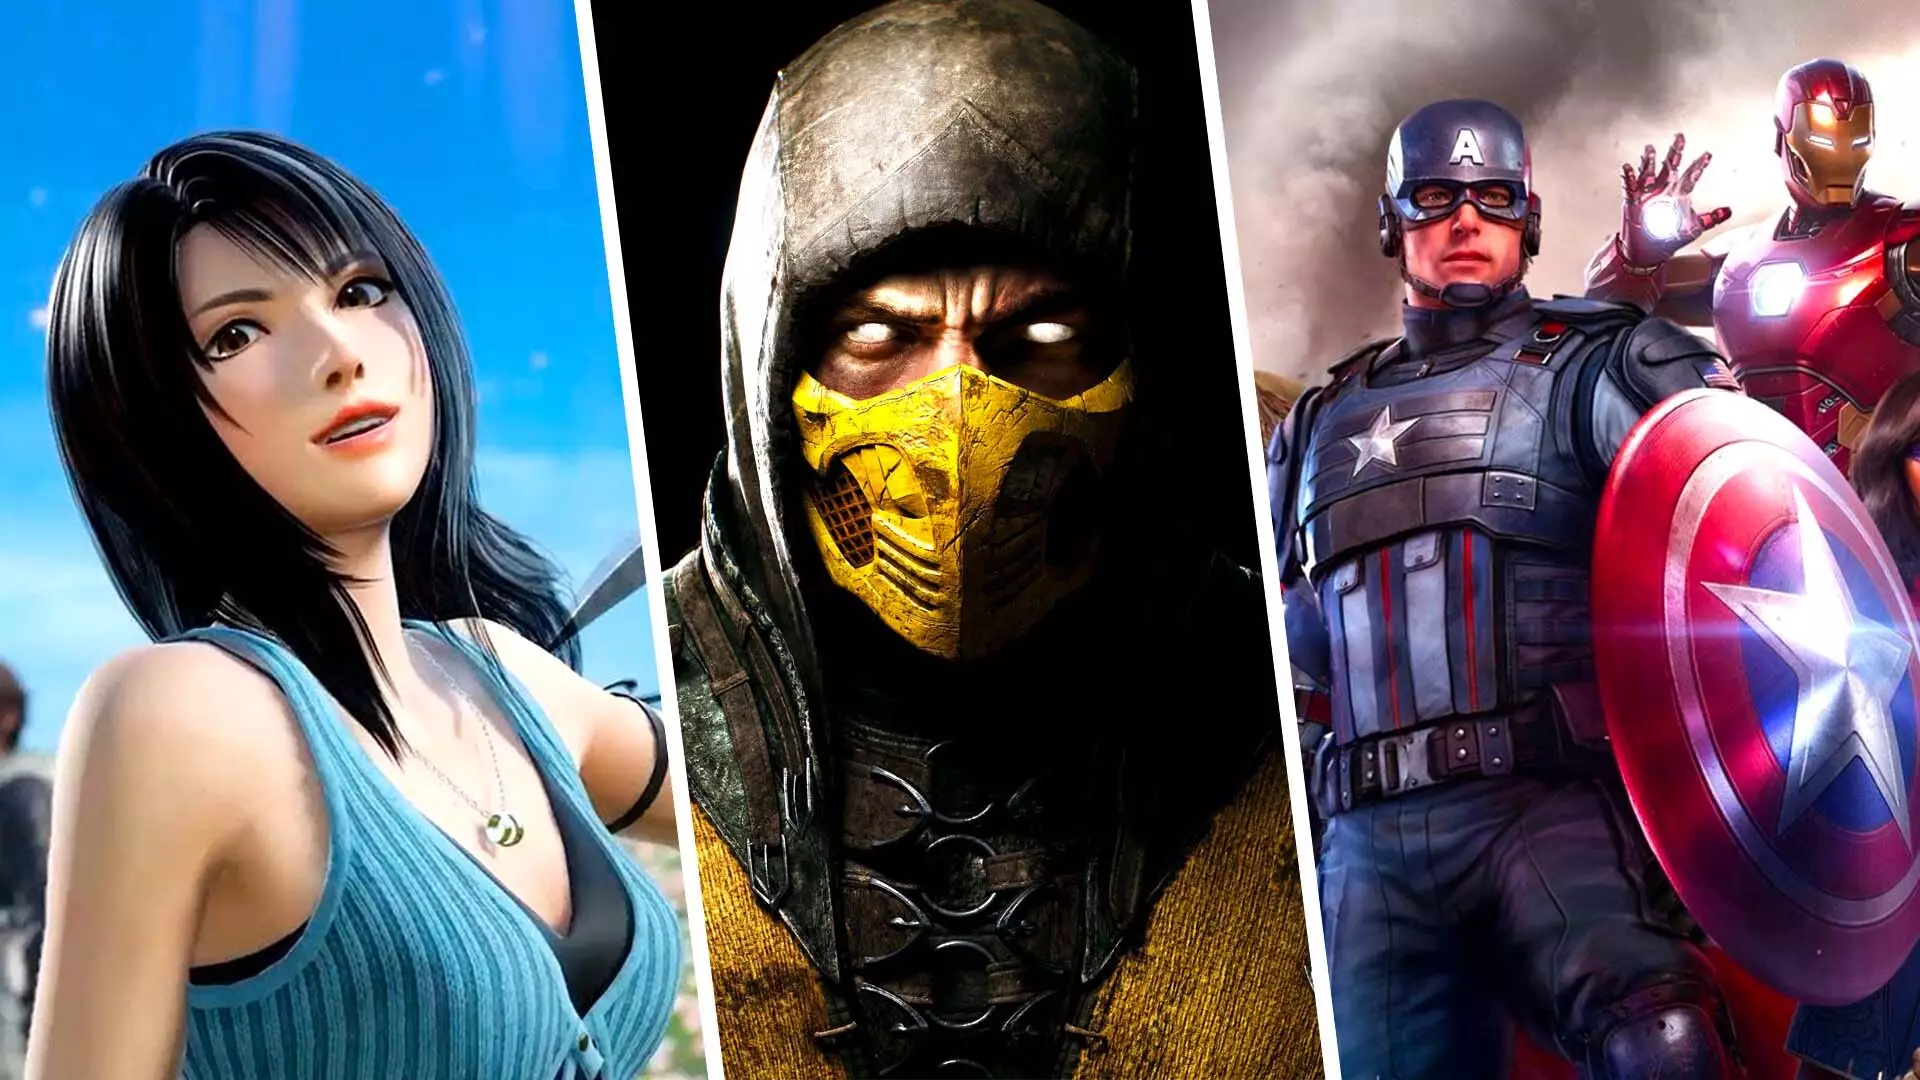 Free Games: Mortal Kombat, ‘Marvel’s Avengers’ And More To Play For No Extra Cost